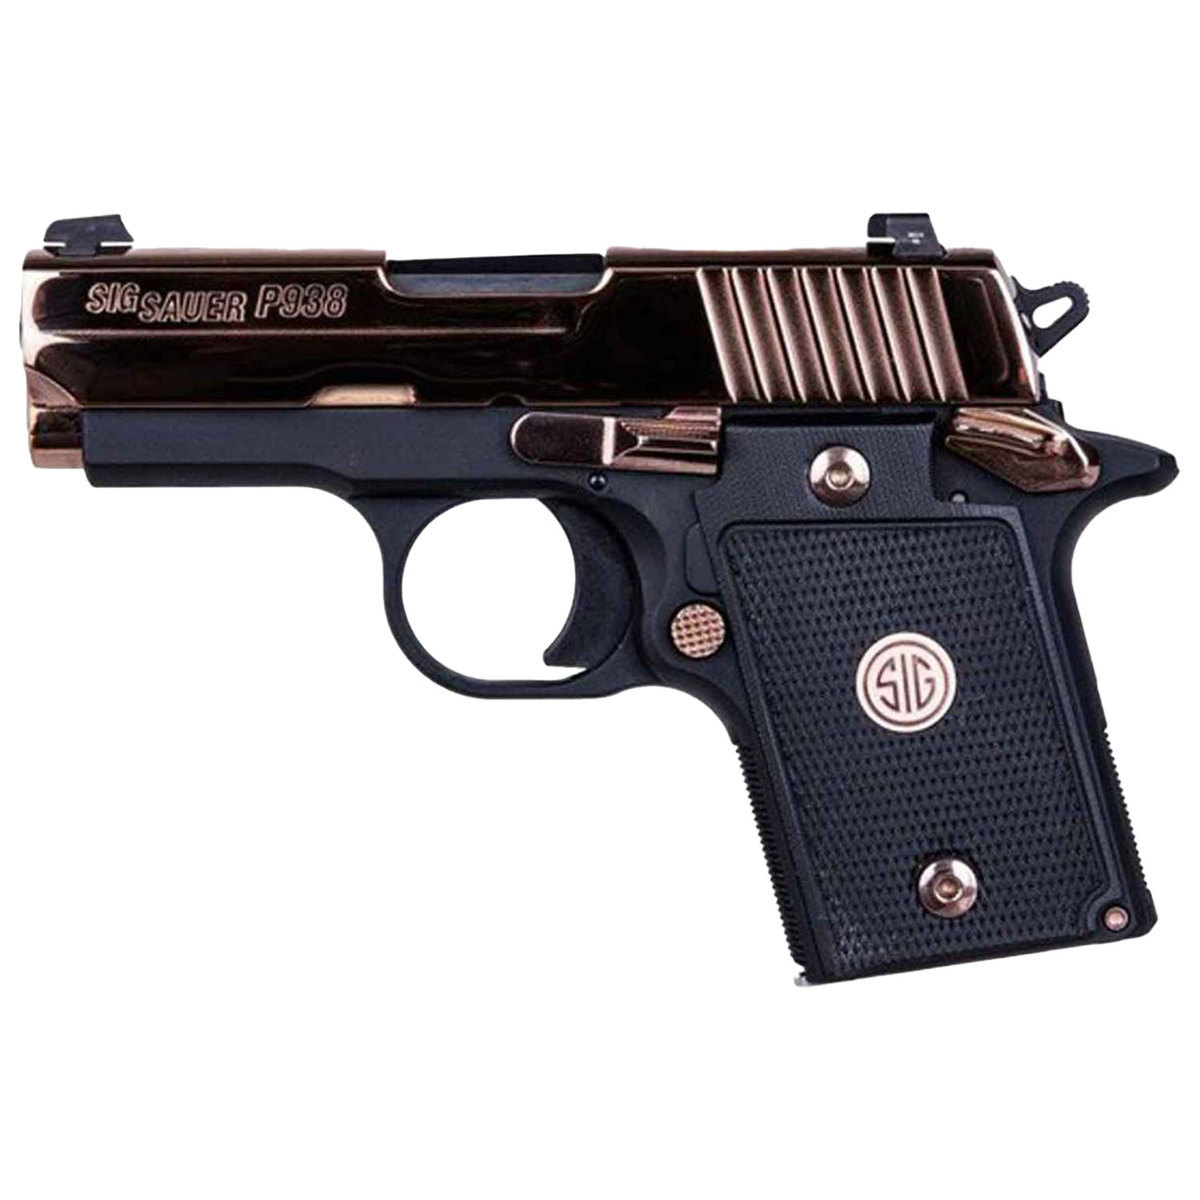 sig sauer p938 9mm luger 3in rose gold pvdblack pistol 61 rounds 1620126 1